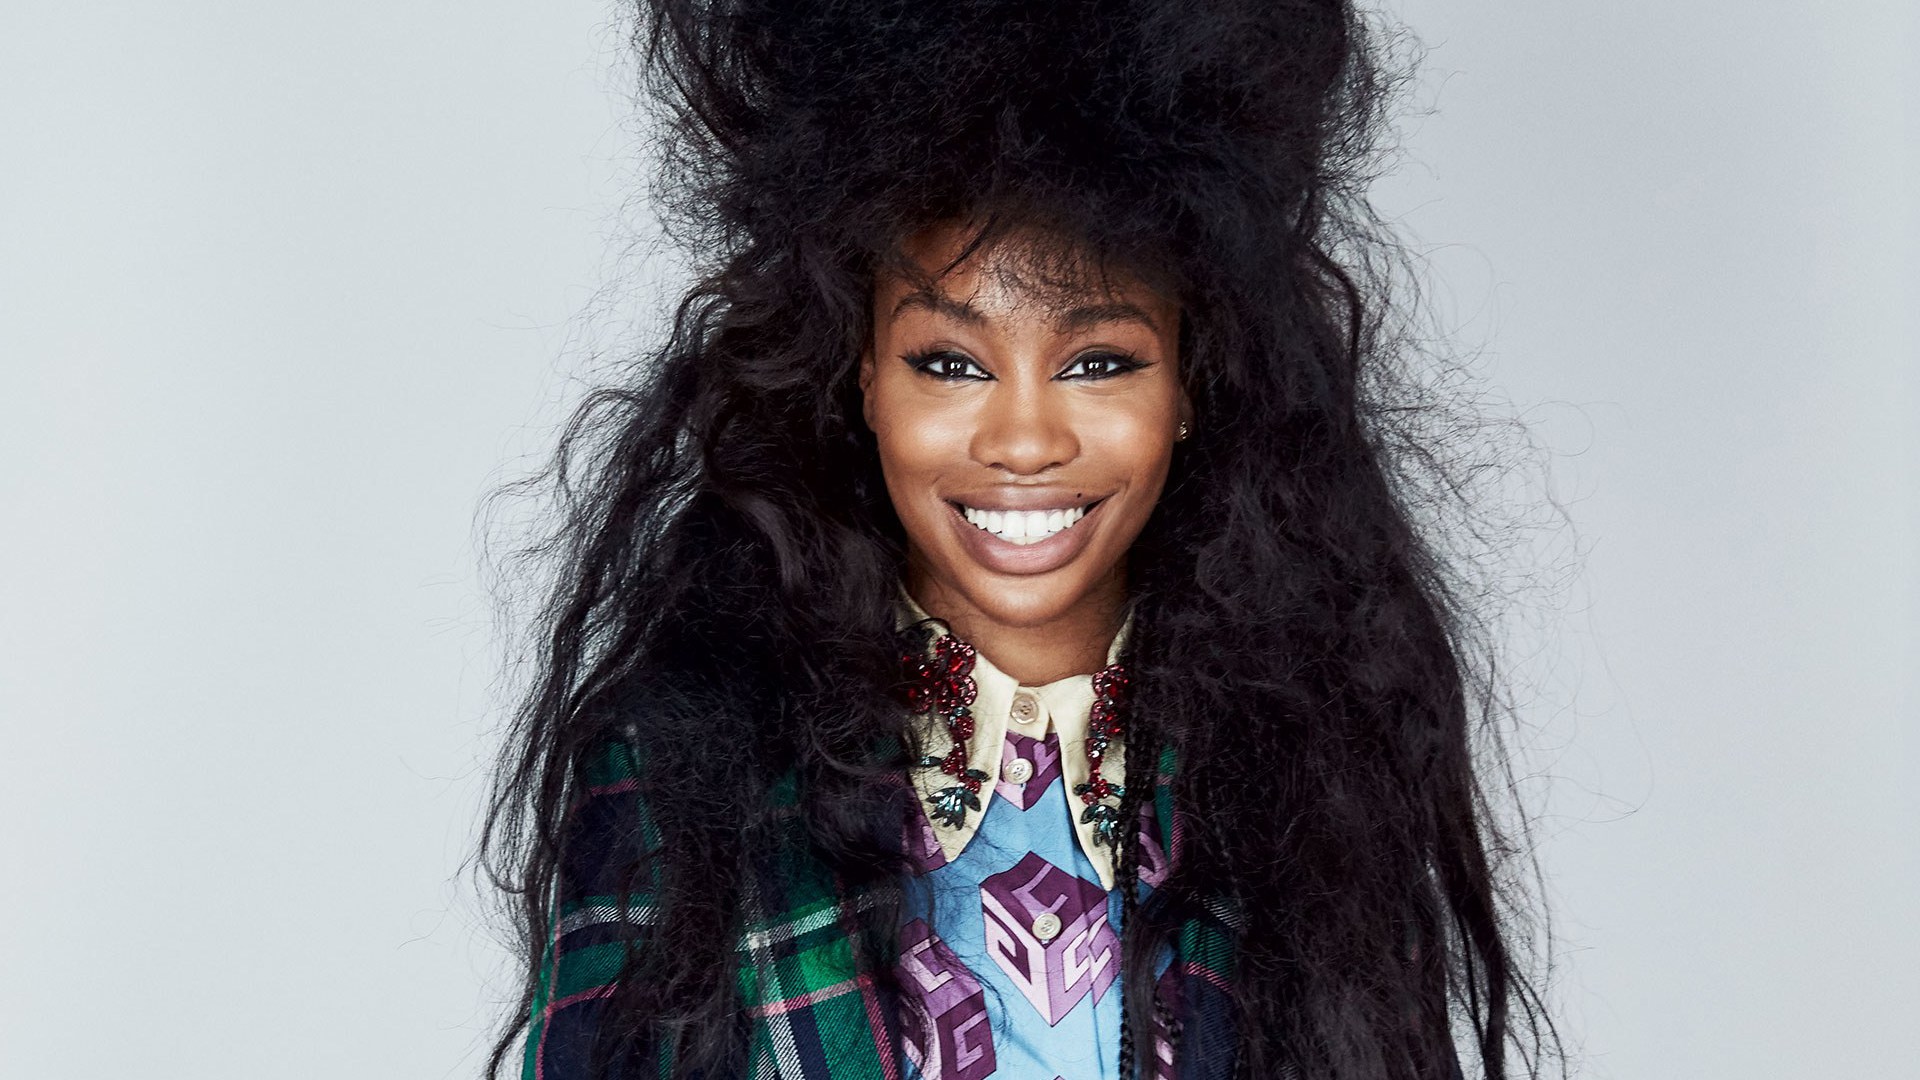 Download Singer and record producer Sza looking confident and powerful  Wallpaper  Wallpaperscom